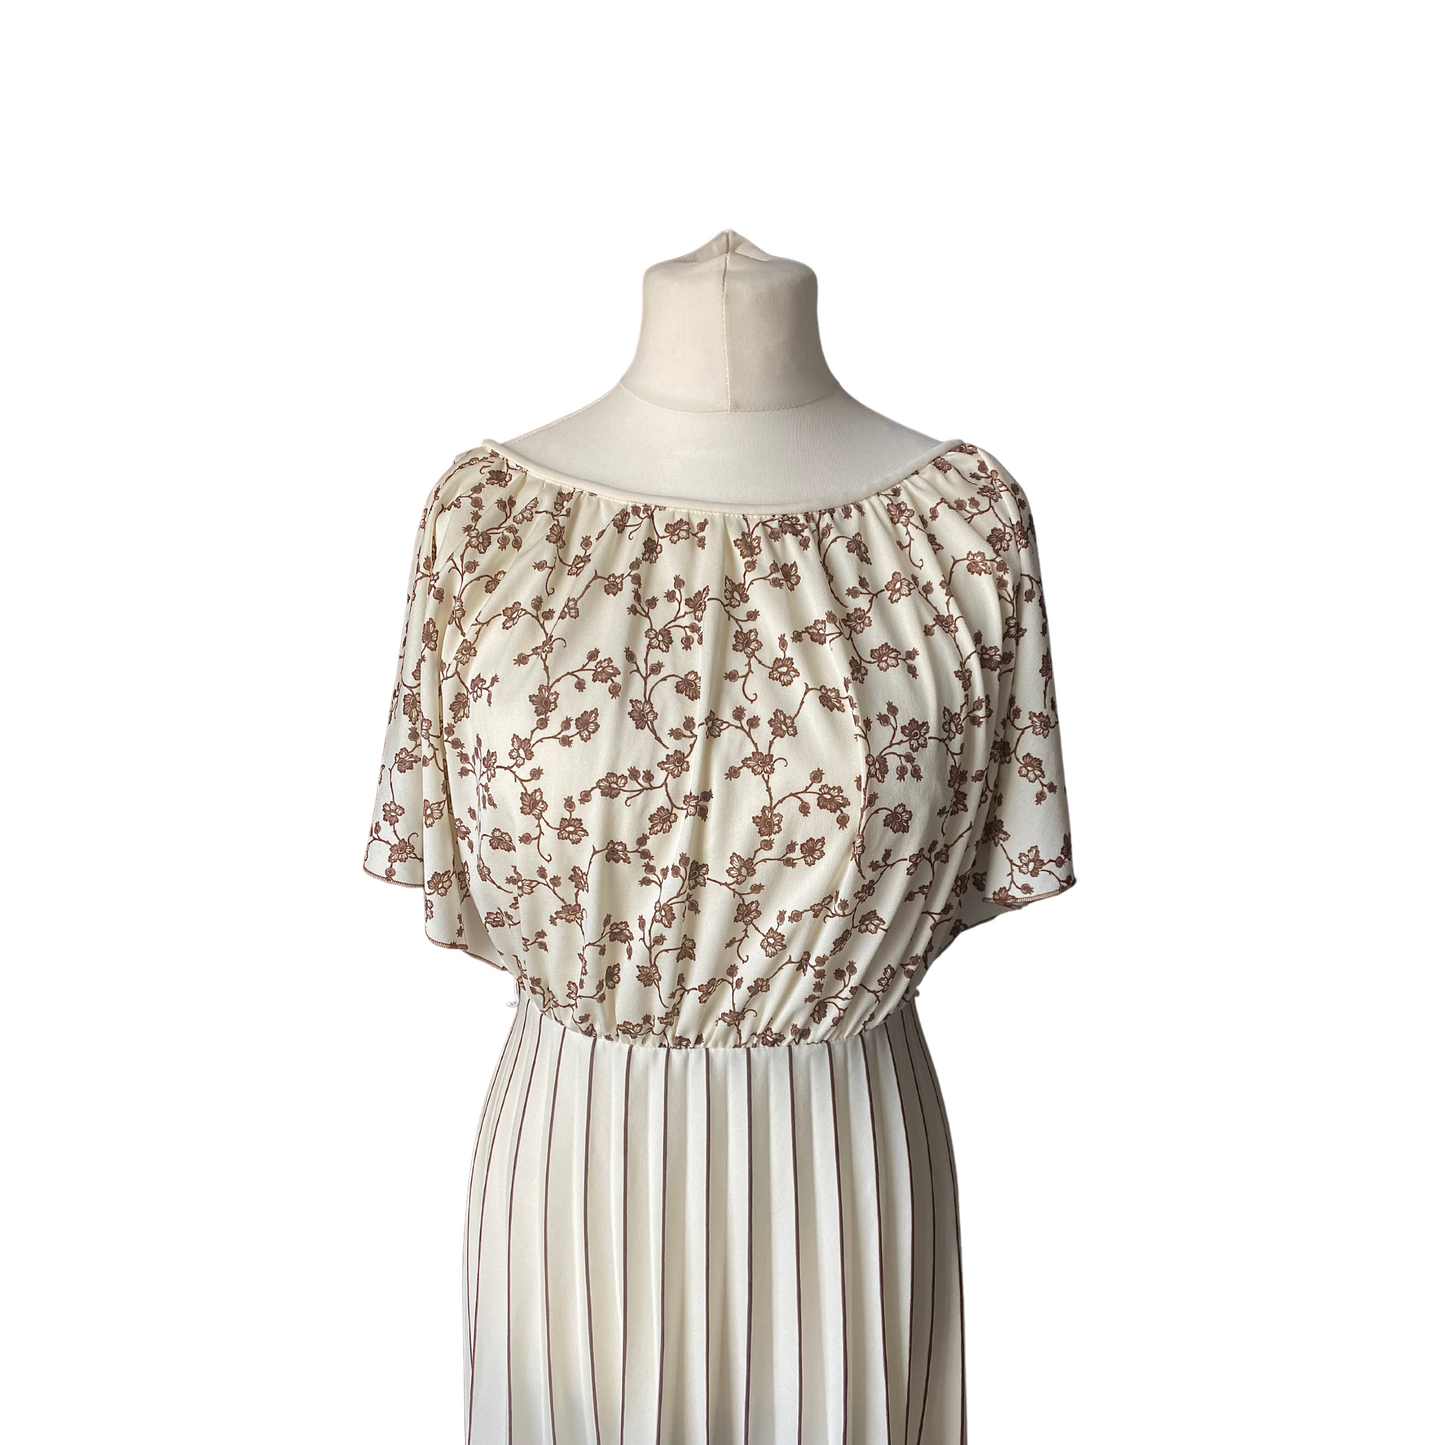 80s cream and brown midi dress with floral bodice and angel sleeves.  Approx U. K. size 10 -12